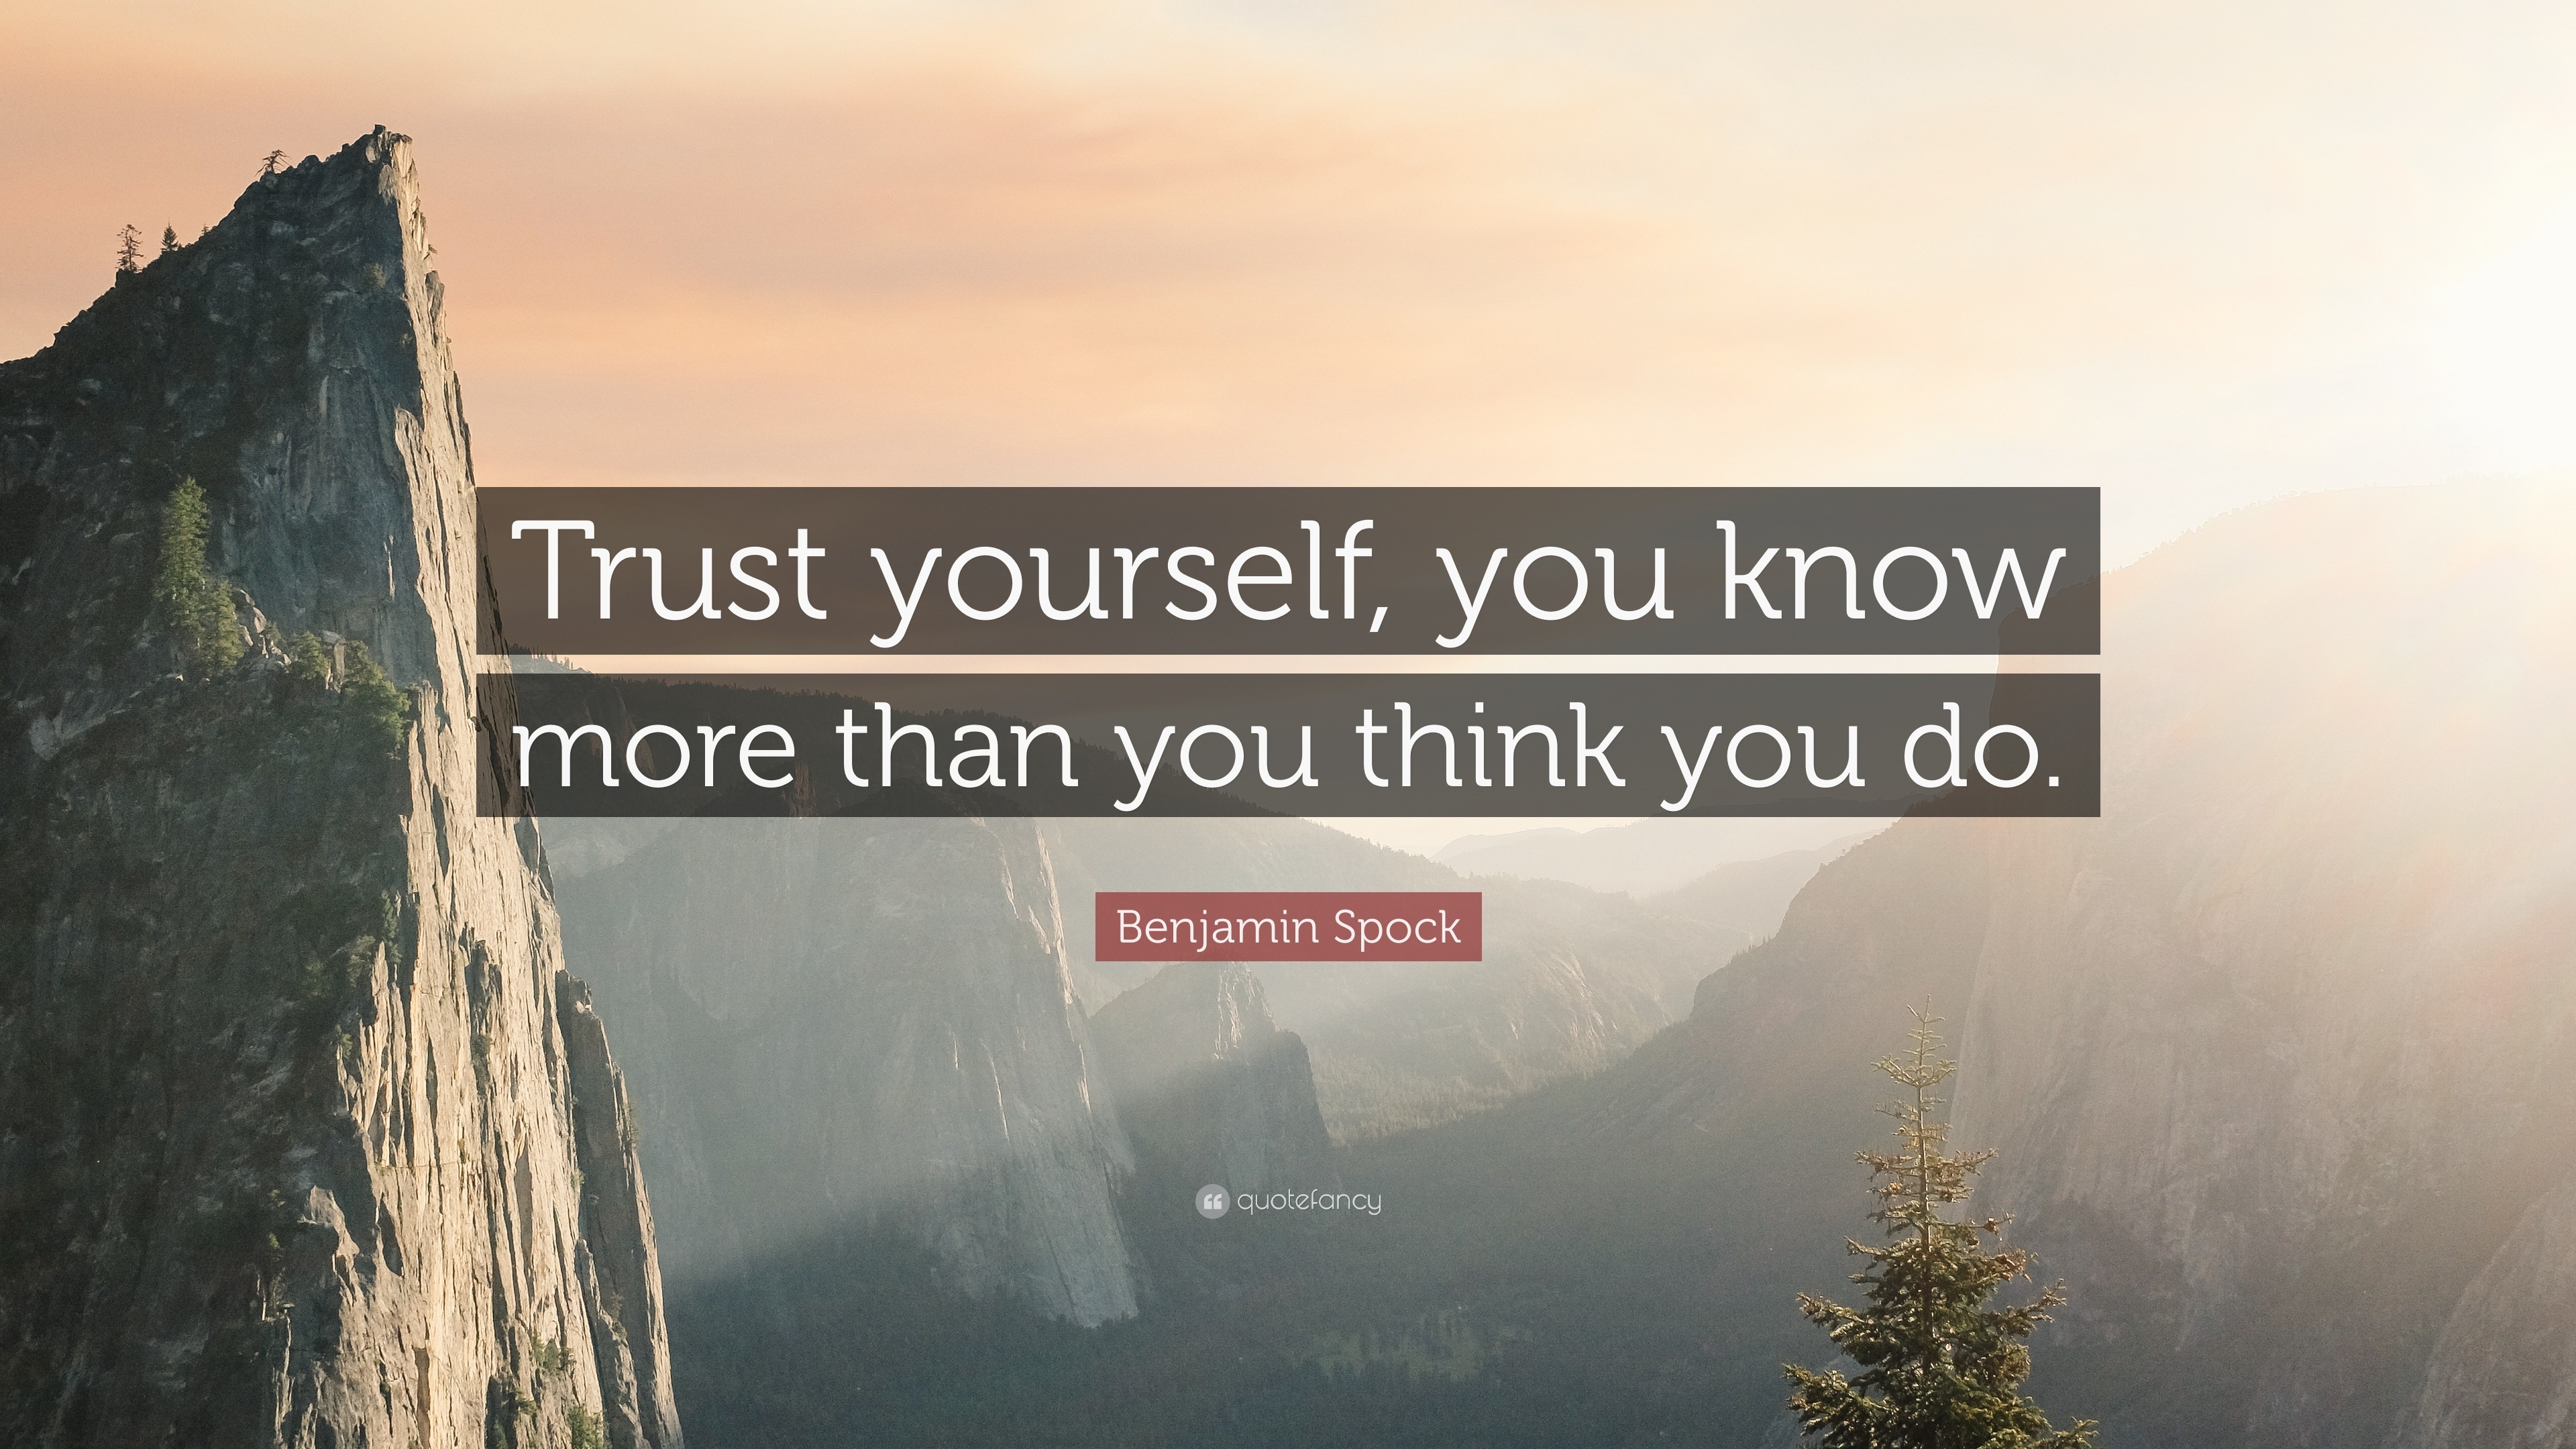 Benjamin Spock Quote: “Trust yourself, you know more than you think you